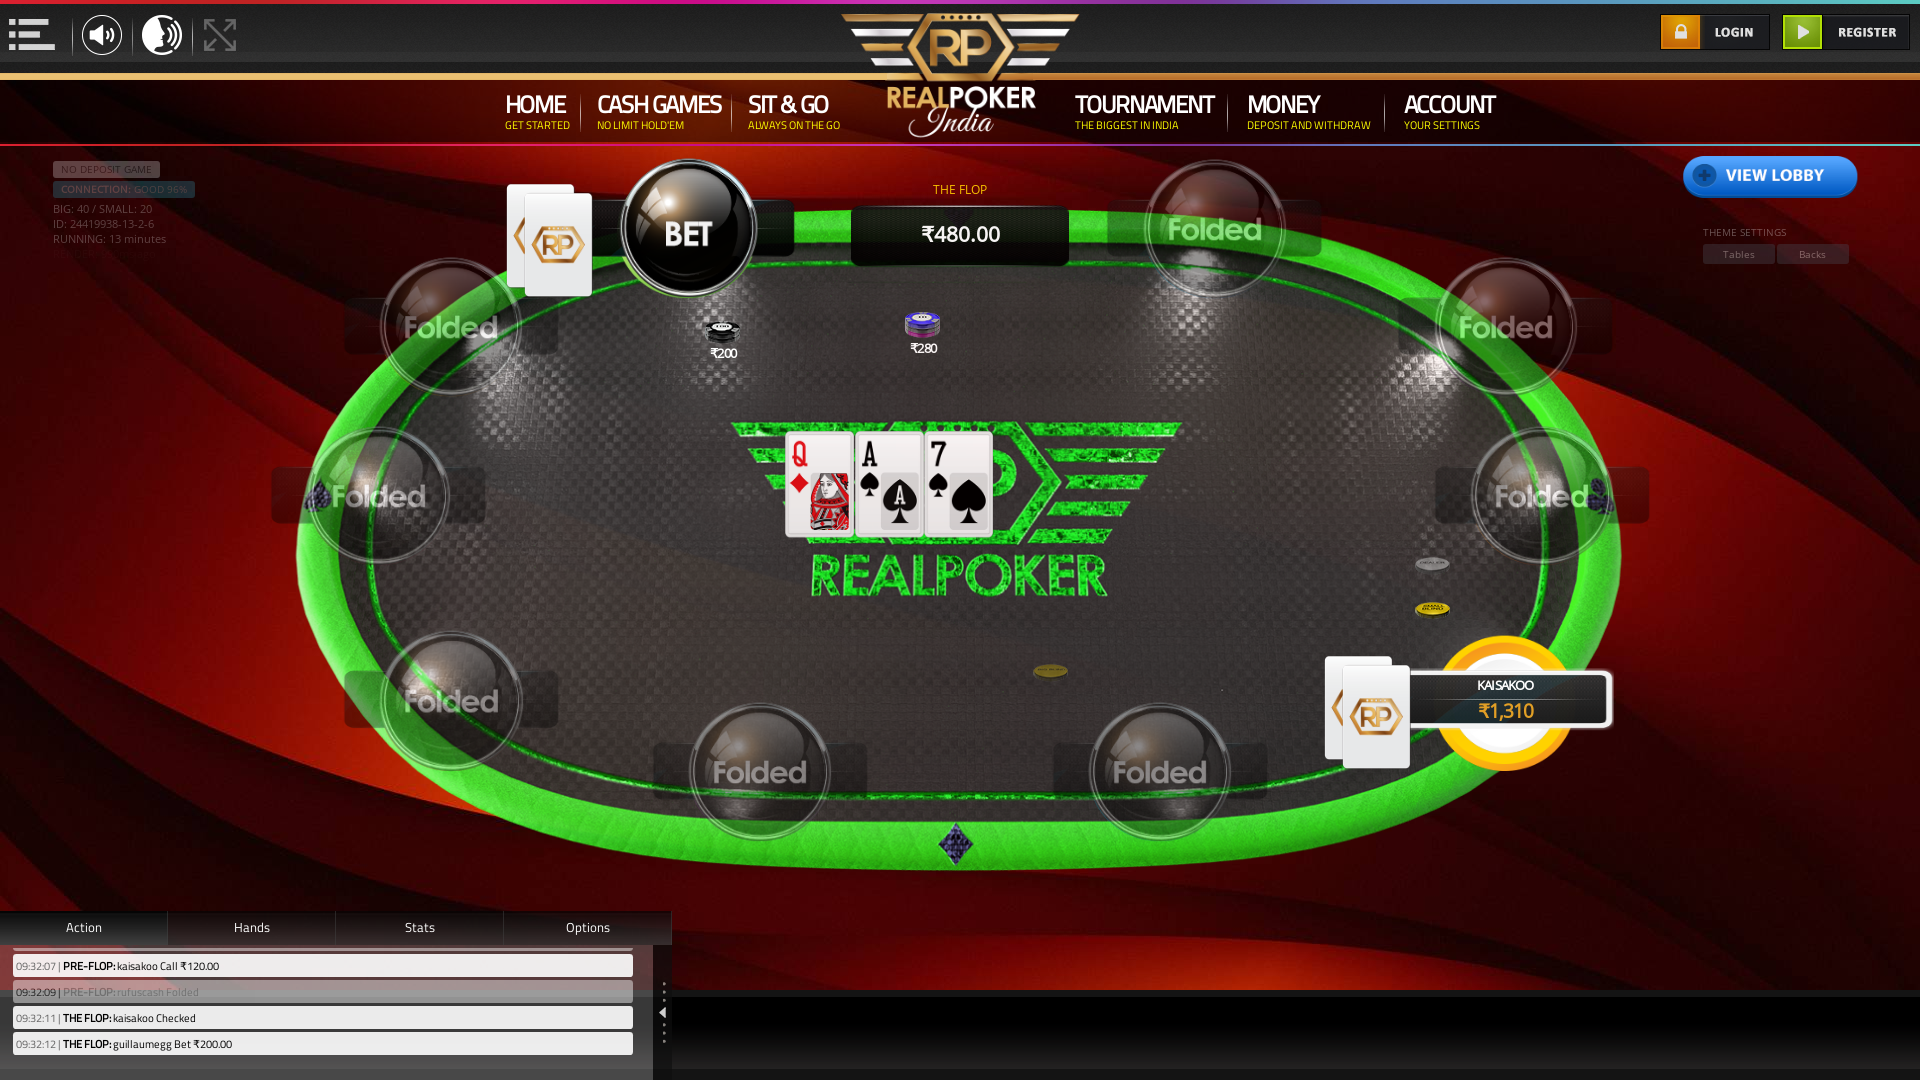 Real poker 10 player table in the 12th minute